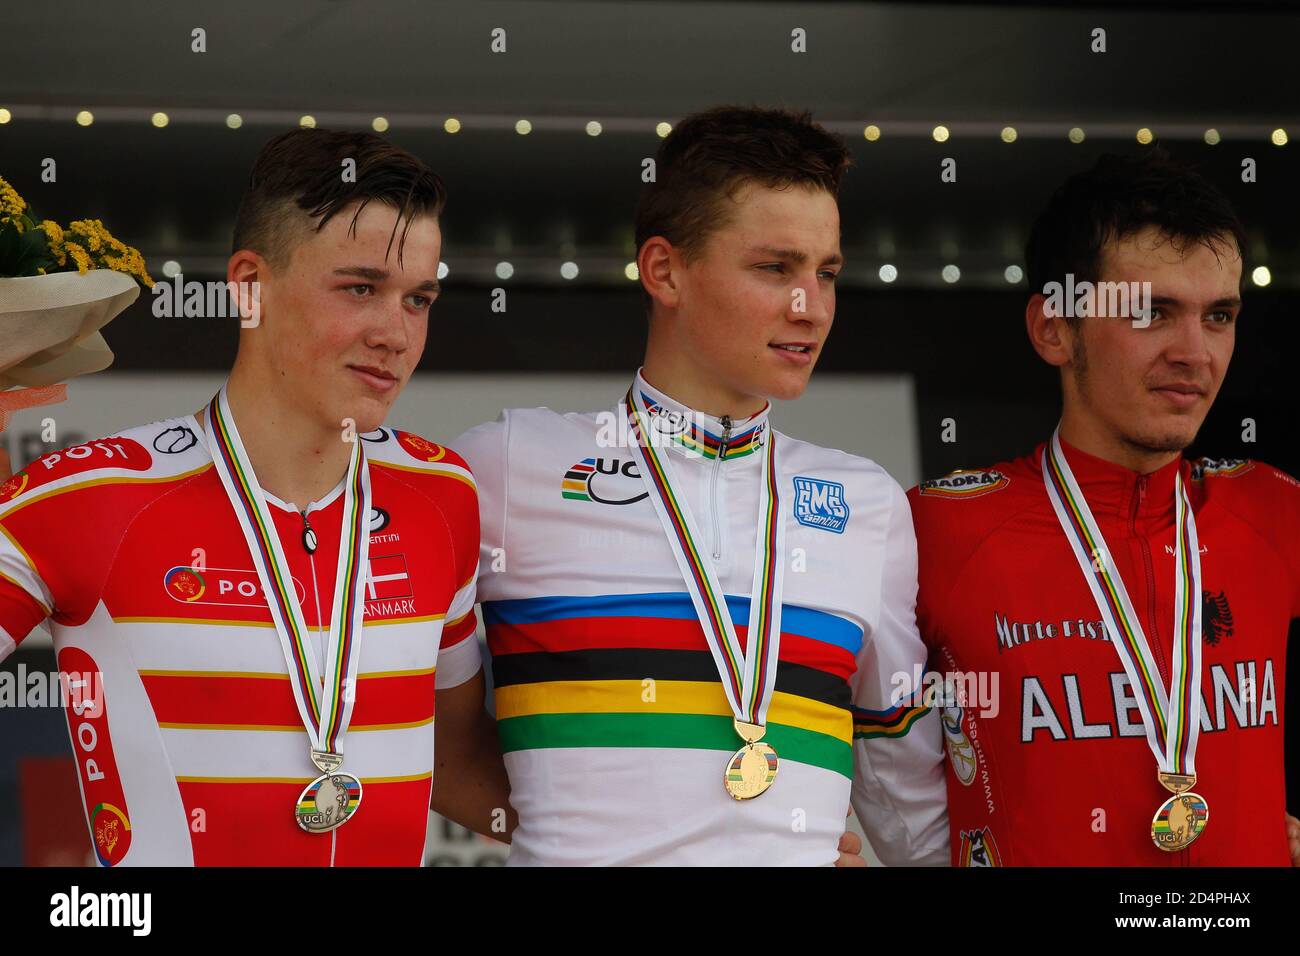 Florence, Italy. 28th Sep, 2013.Mads Pedersen of Danemark , Mathieu Van der  Poel of Nederland and Iltjan Nika of Albanie during the 2013 UCI World Road  Championships, Junior Elite Road Race, on